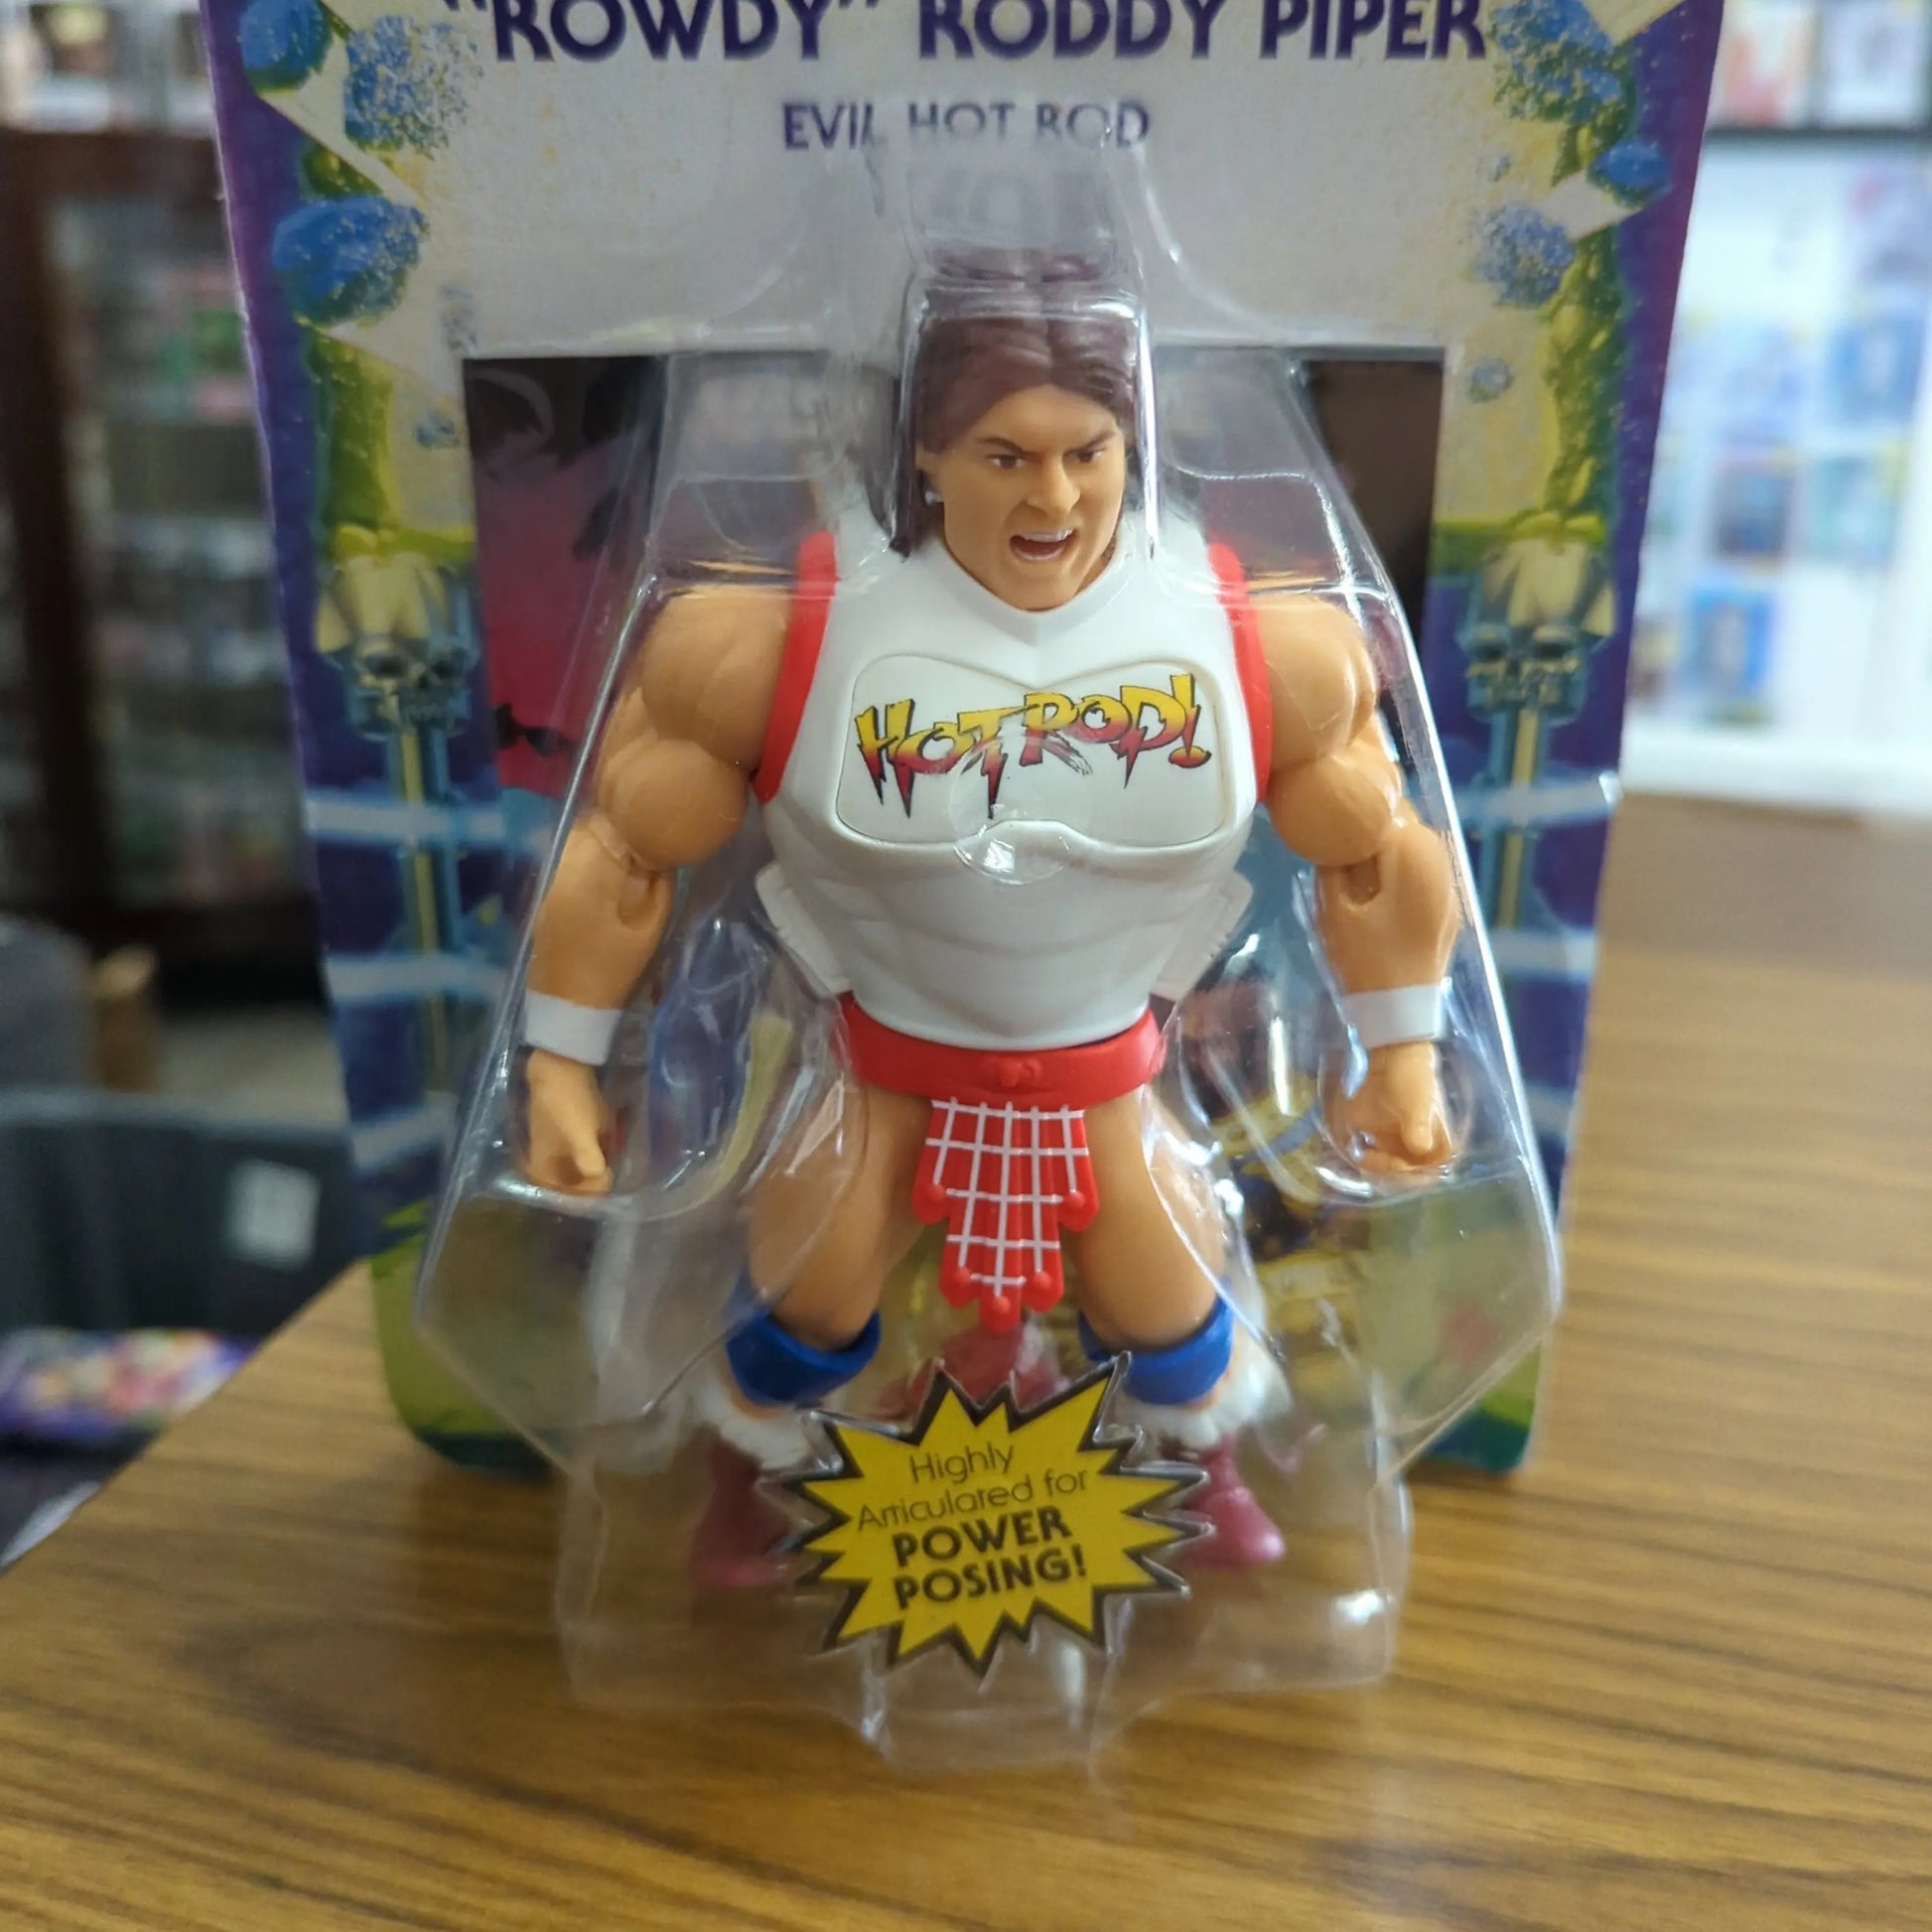 Rowdy Roddy Piper Masters of The WWE Universe Wave 5 Action Figure FRENLY BRICKS - Open 7 Days